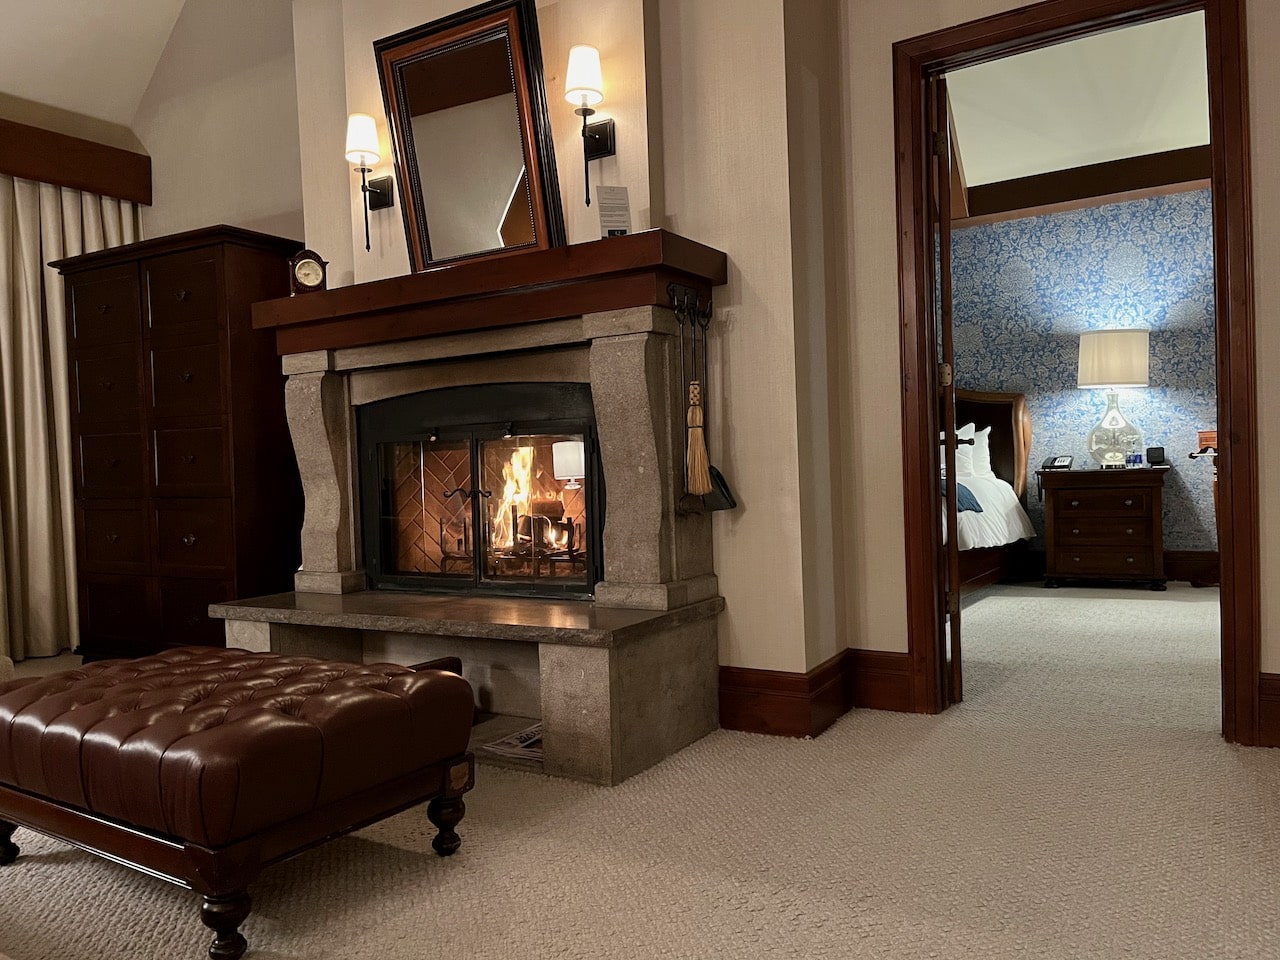 The Hôtel Quintessence staff can help you soup up your personal fireplace.